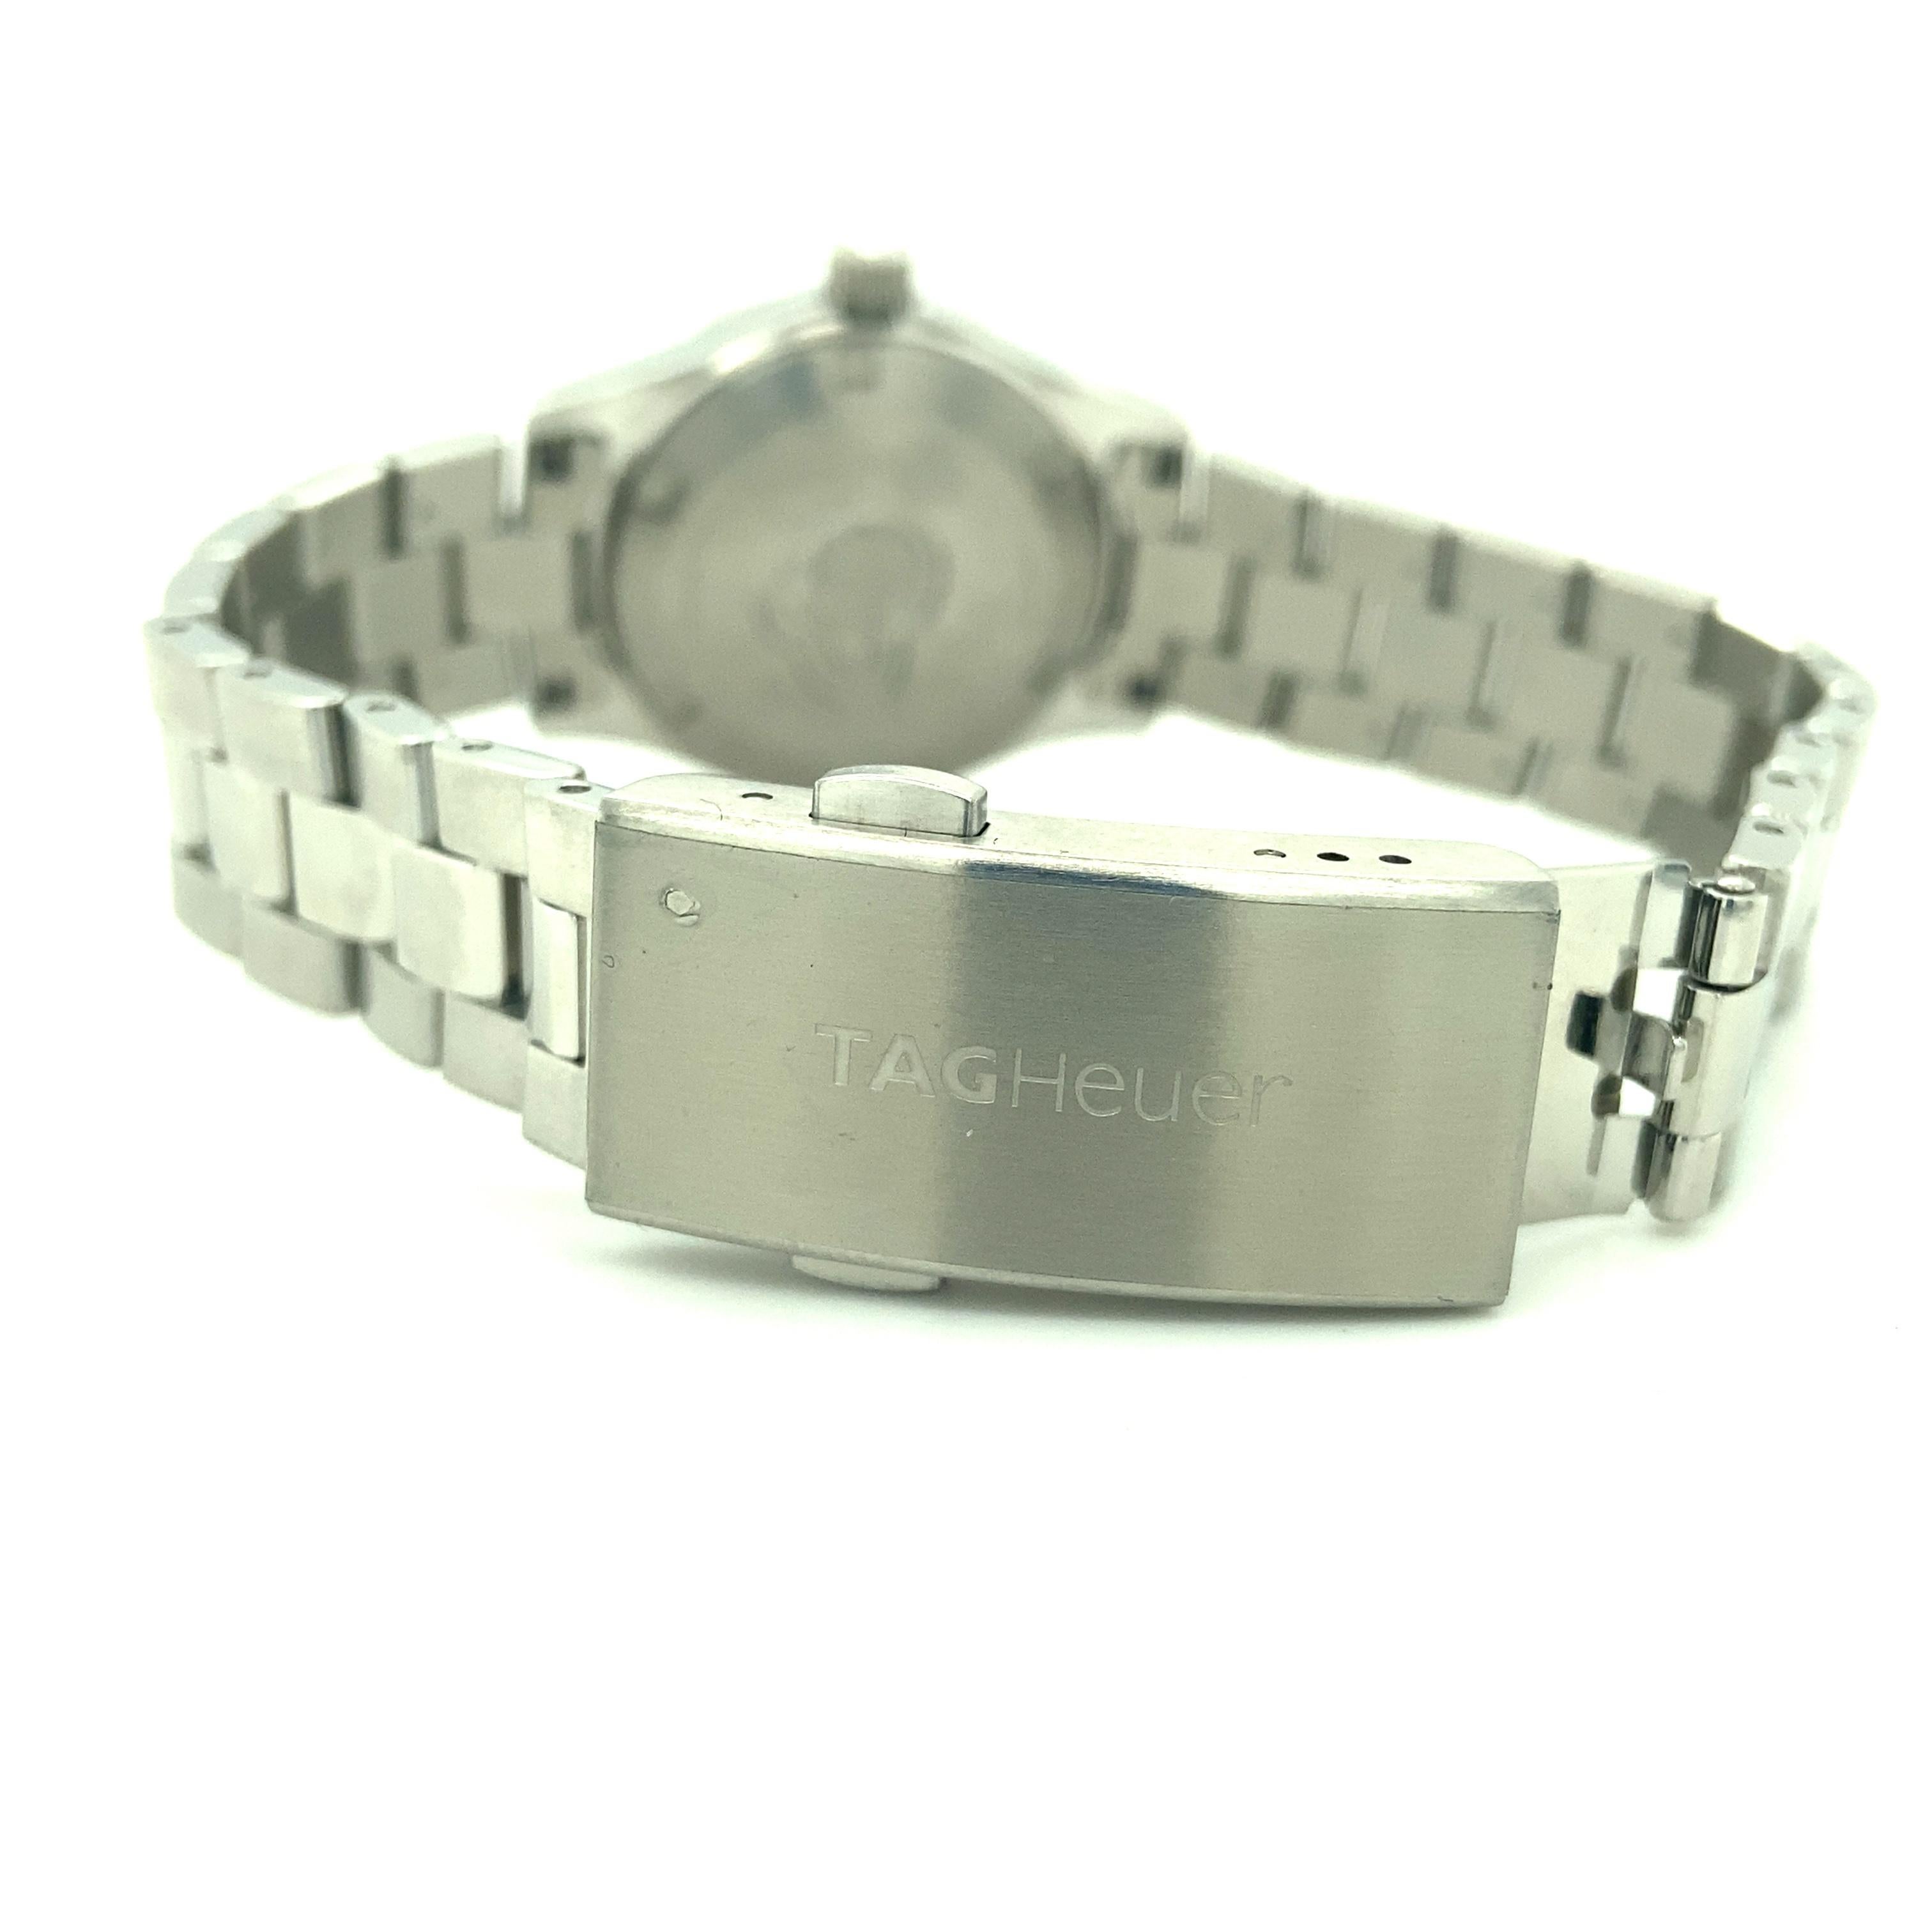 TAG Hauer Aquaracer Mother of Pearl Dial Women's Watch WAF1417 RBL2874 1